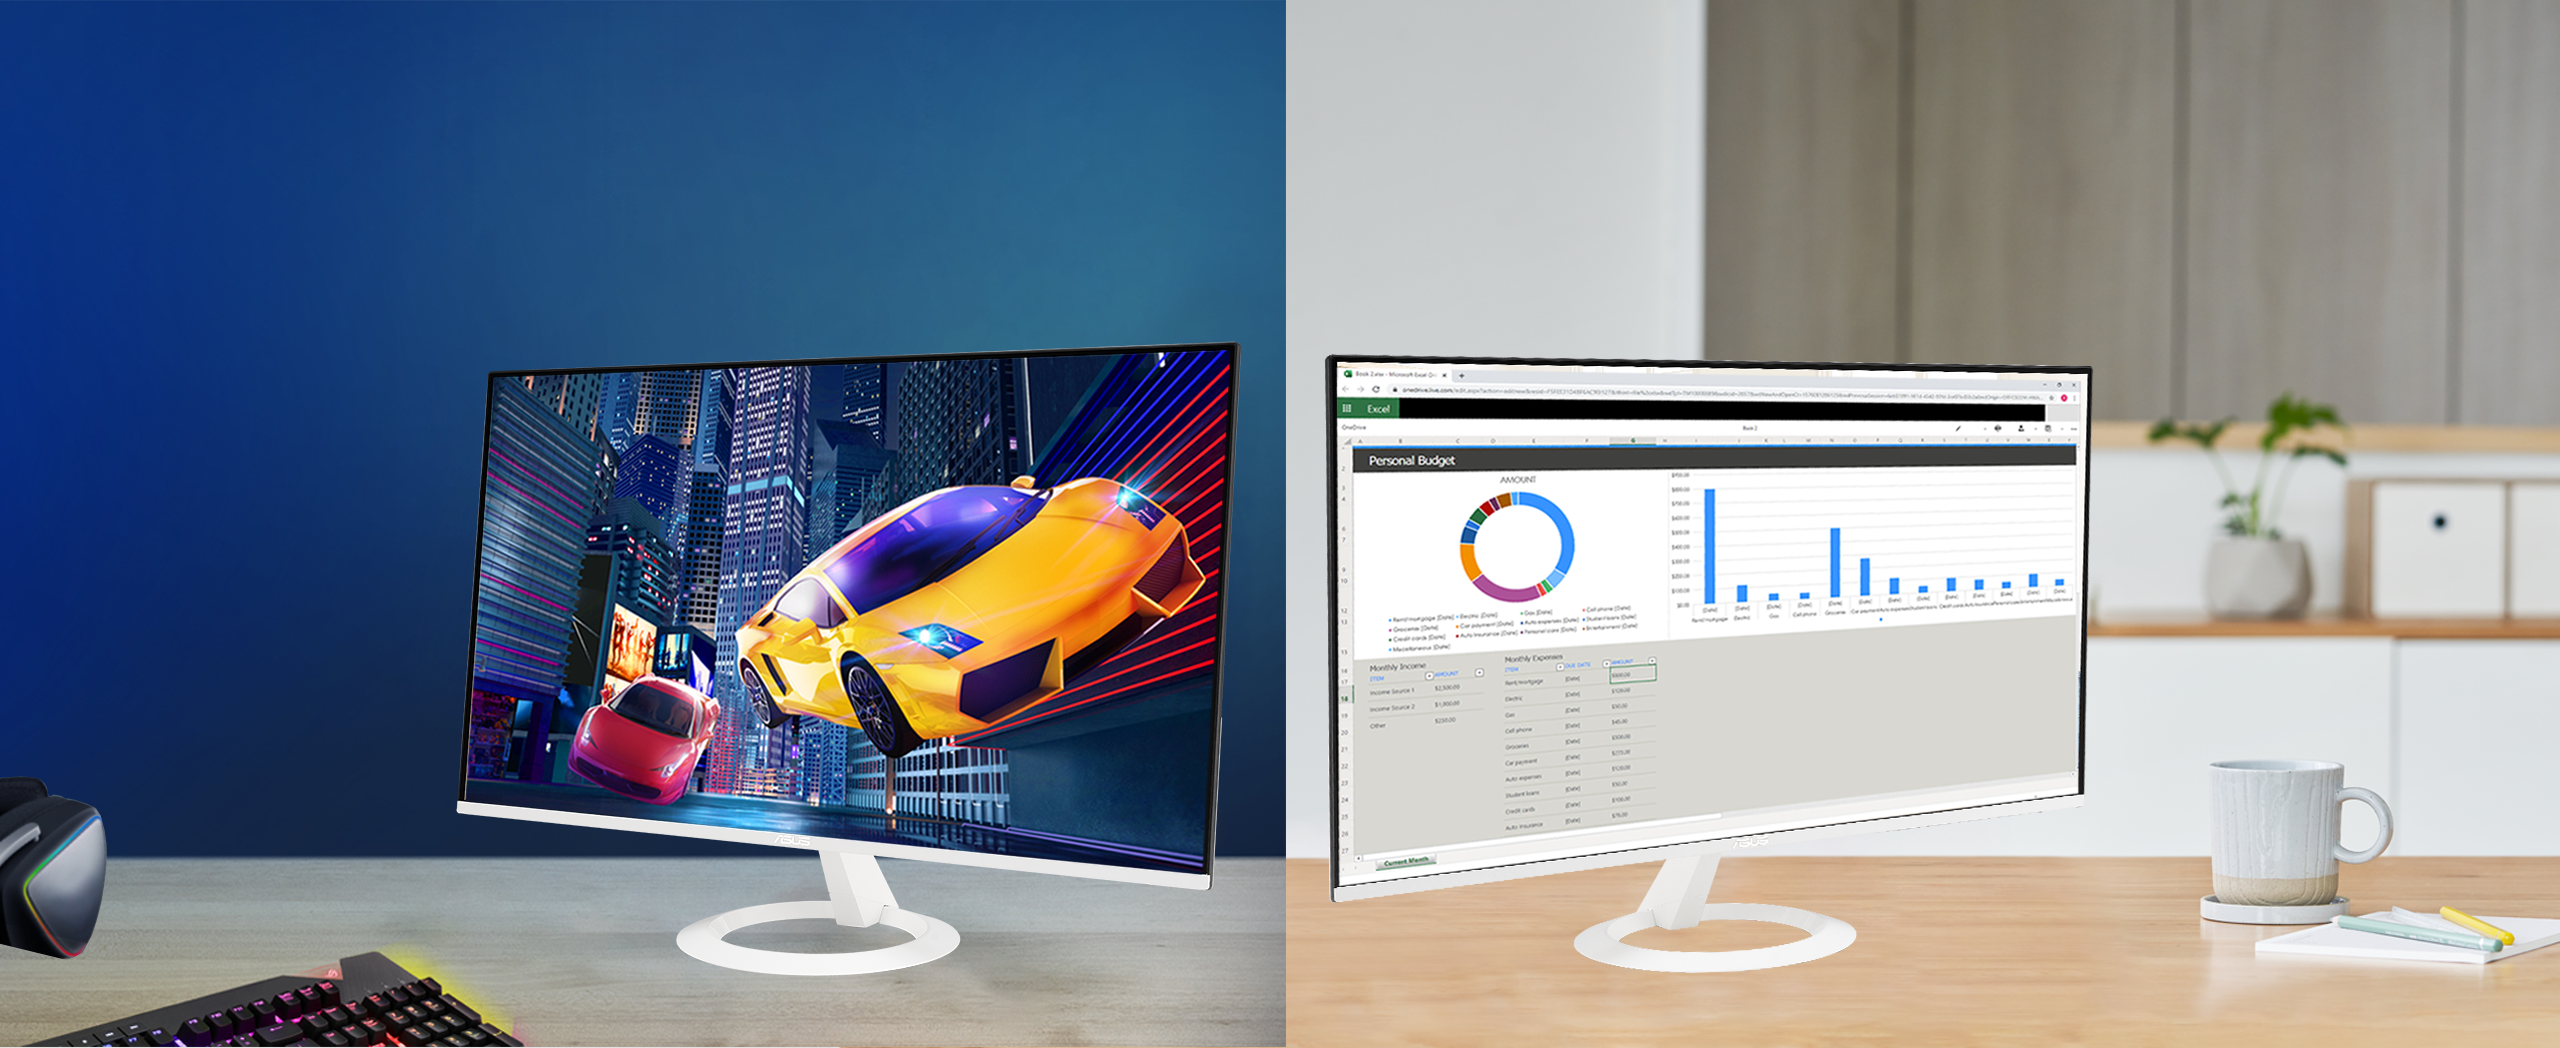 ASUS VZ27EHF-W is 27-inch IPS Eye Care Gaming monitor with fast 100Hz refresh rate and Adaptive-Sync technology to eliminate screen tearing and choppy frame rates for the smoother-than-ever experience.